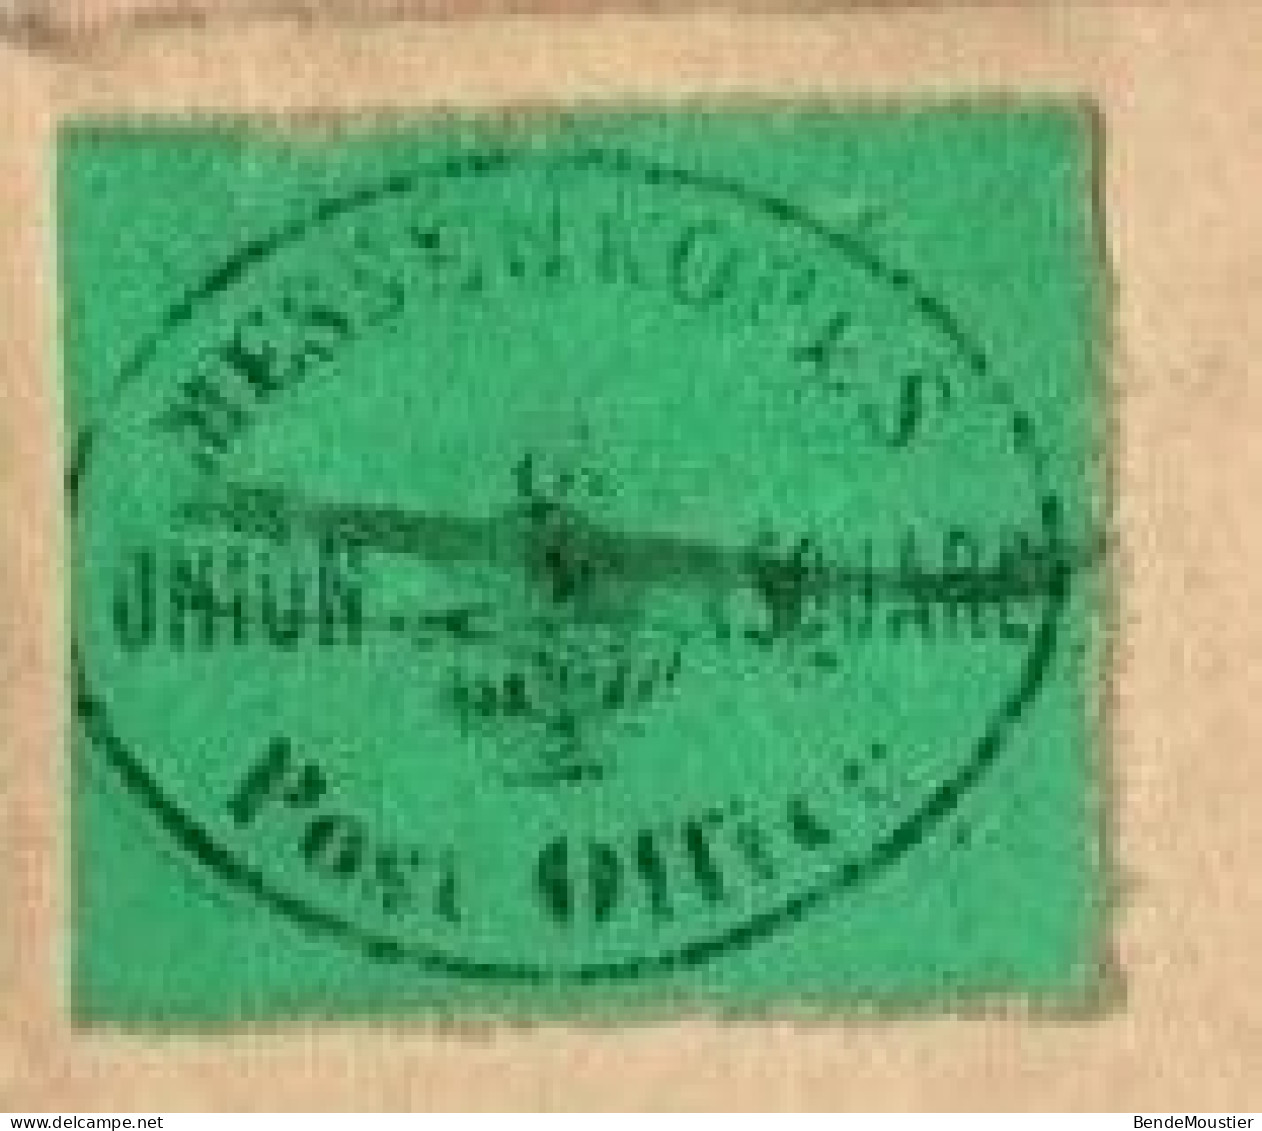 (R122) SCOTT # 106 L1  (L217) - Black On Green - Red Handstamp - Messenkope's Union Square Post Office - 1849. - Poste Locali